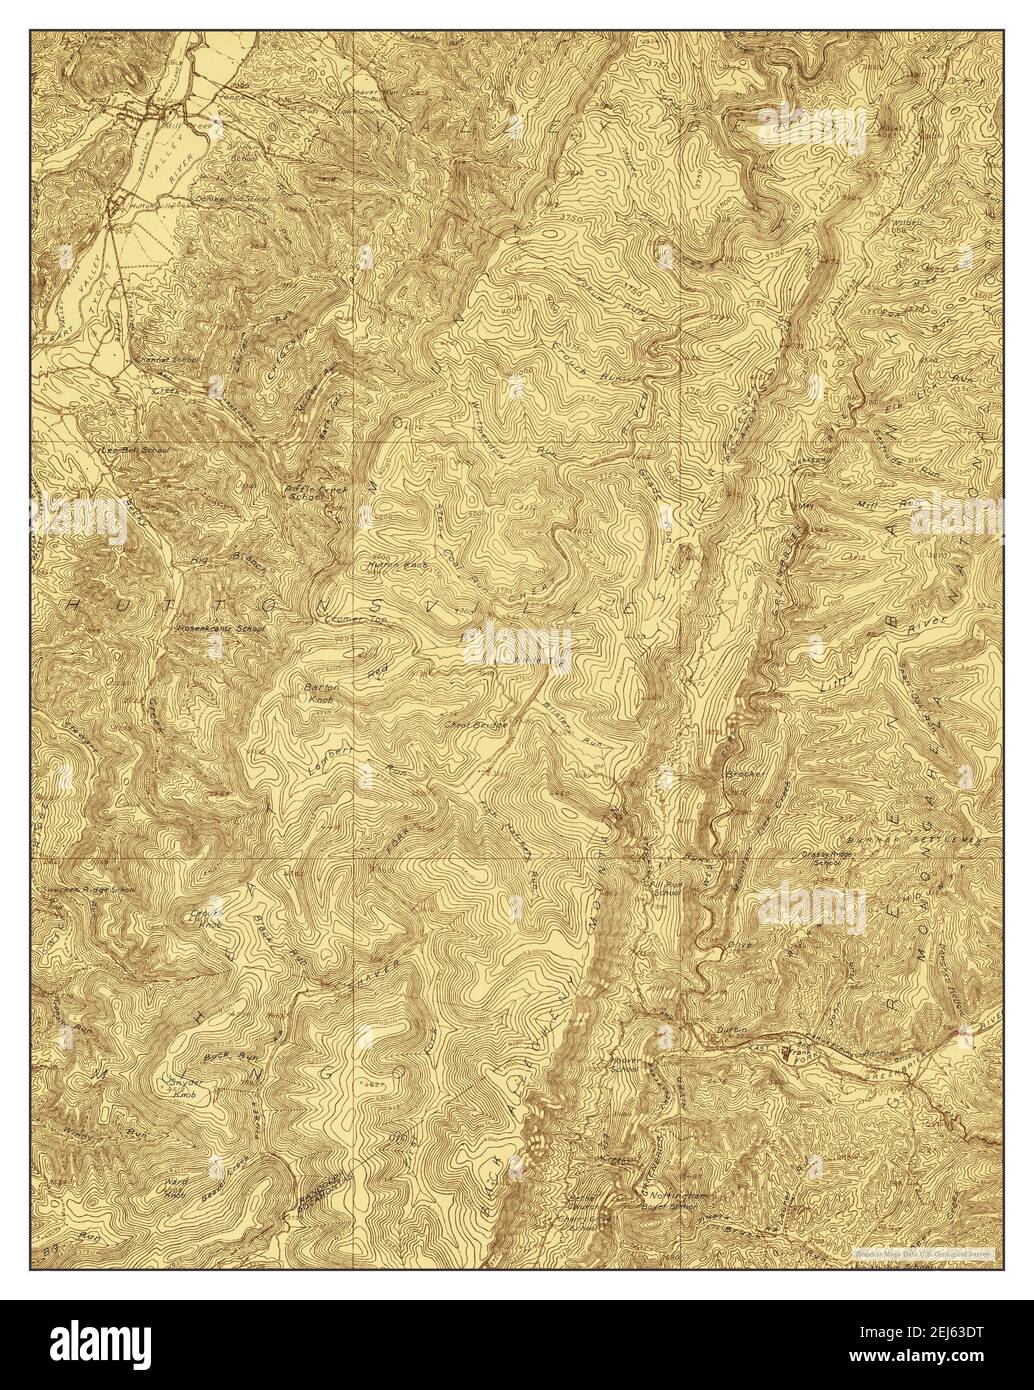 Durbin, West Virginia, map 1922, 1:48000, United States of America by Timeless Maps, data U.S. Geological Survey Stock Photo